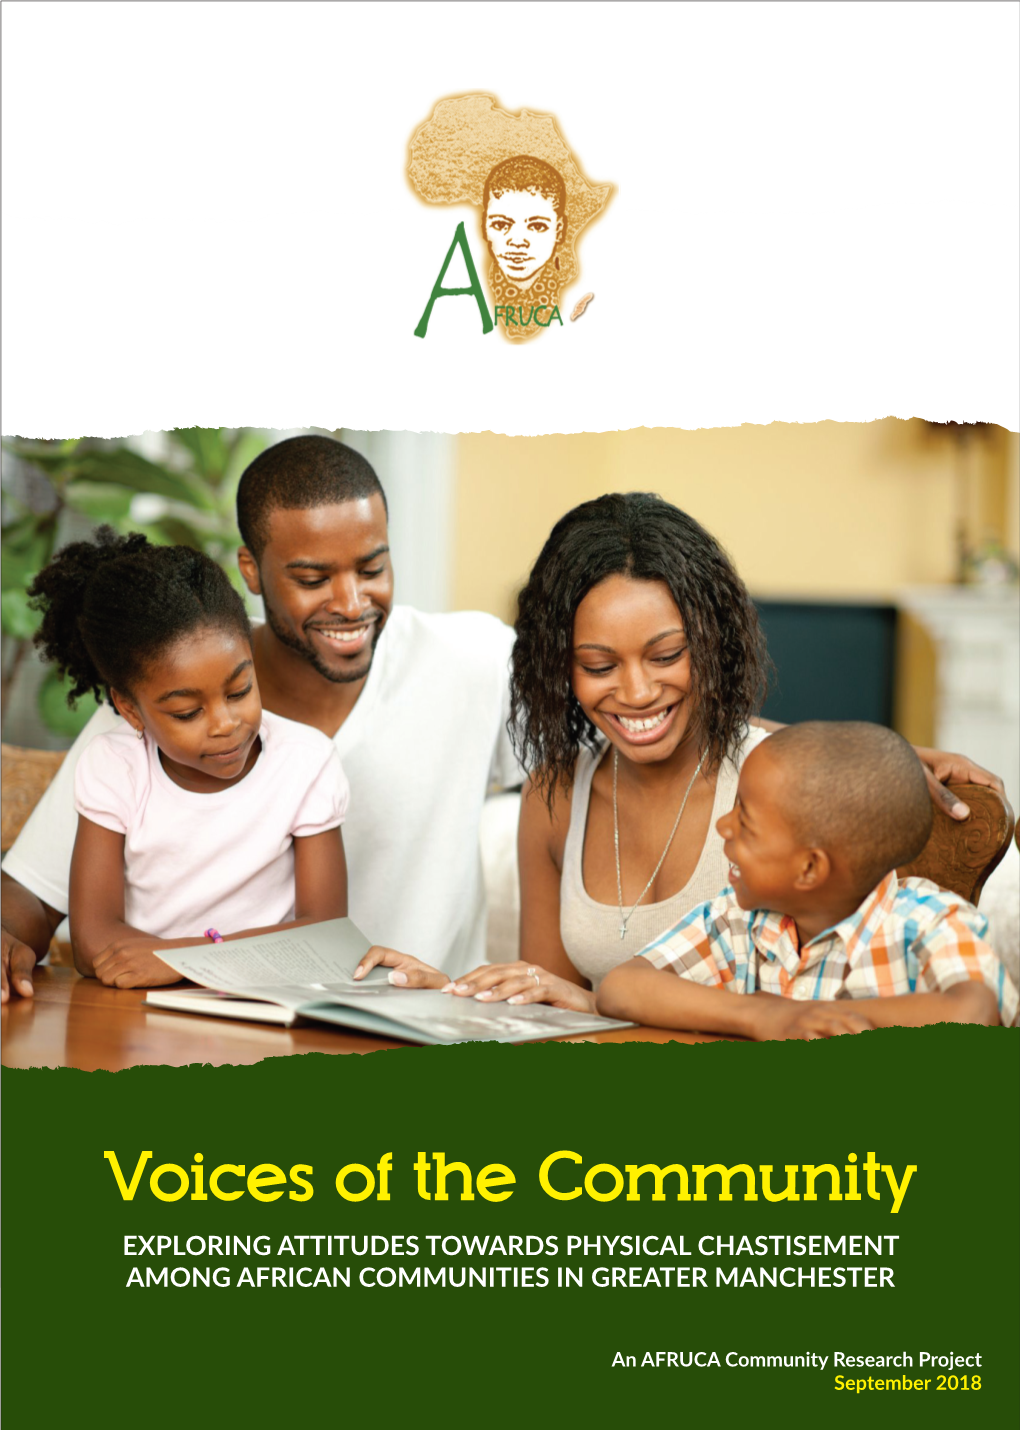 Voices of the Community EXPLORING ATTITUDES TOWARDS PHYSICAL CHASTISEMENT AMONG AFRICAN COMMUNITIES in GREATER MANCHESTER